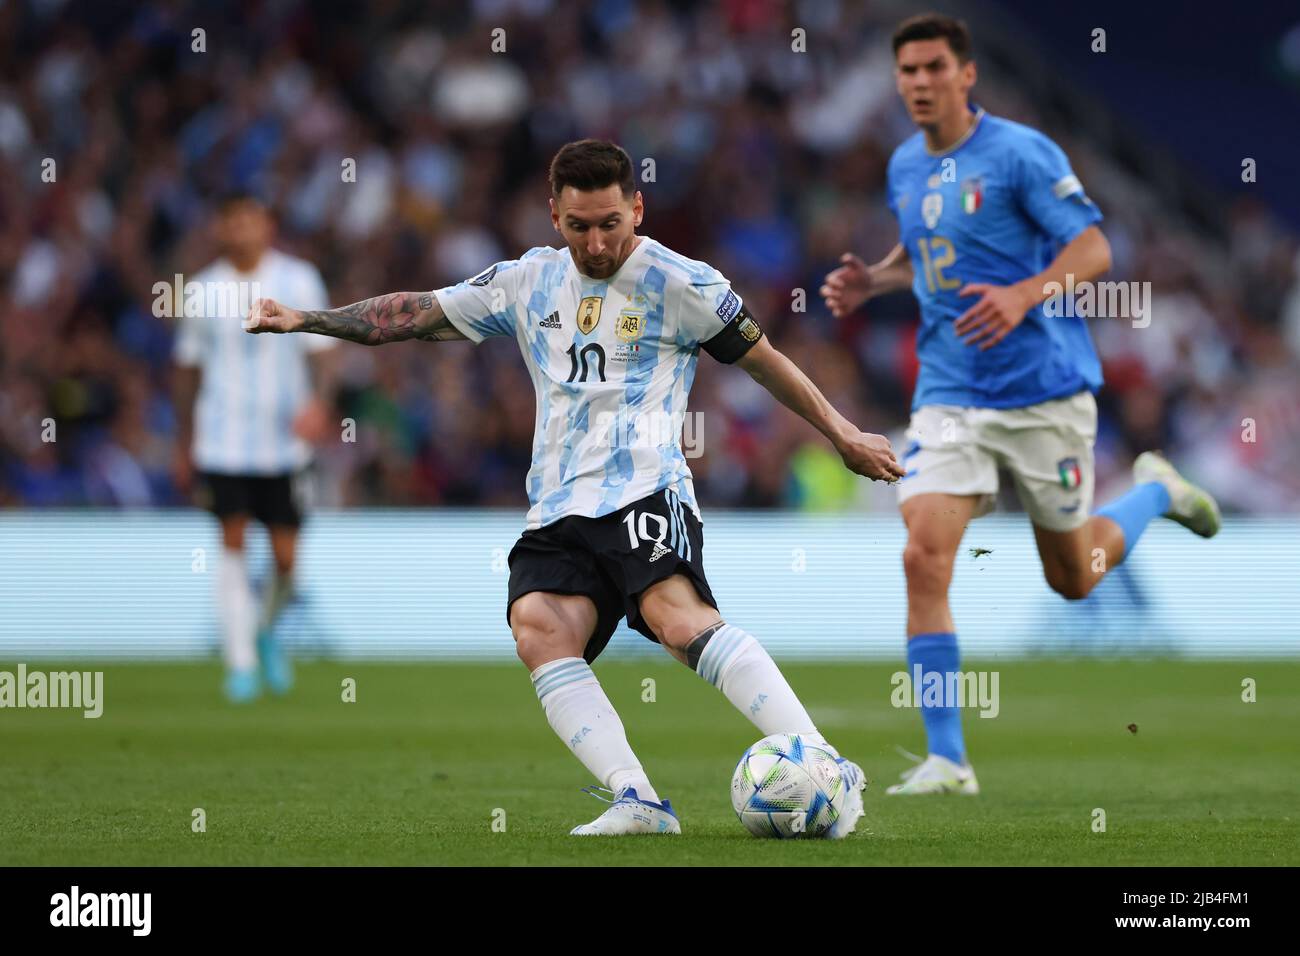 London, England, 1st June 2022. Lionel Messi of Argentina lines up a shot on the Italy goal as Matteo Pessina of Italy looks on during the CONMEBOL-UEFA Cup of Champions match at Wembley Stadium, London. Picture credit should read: Jonathan Moscrop / Sportimage Credit: Sportimage/Alamy Live News Stock Photo